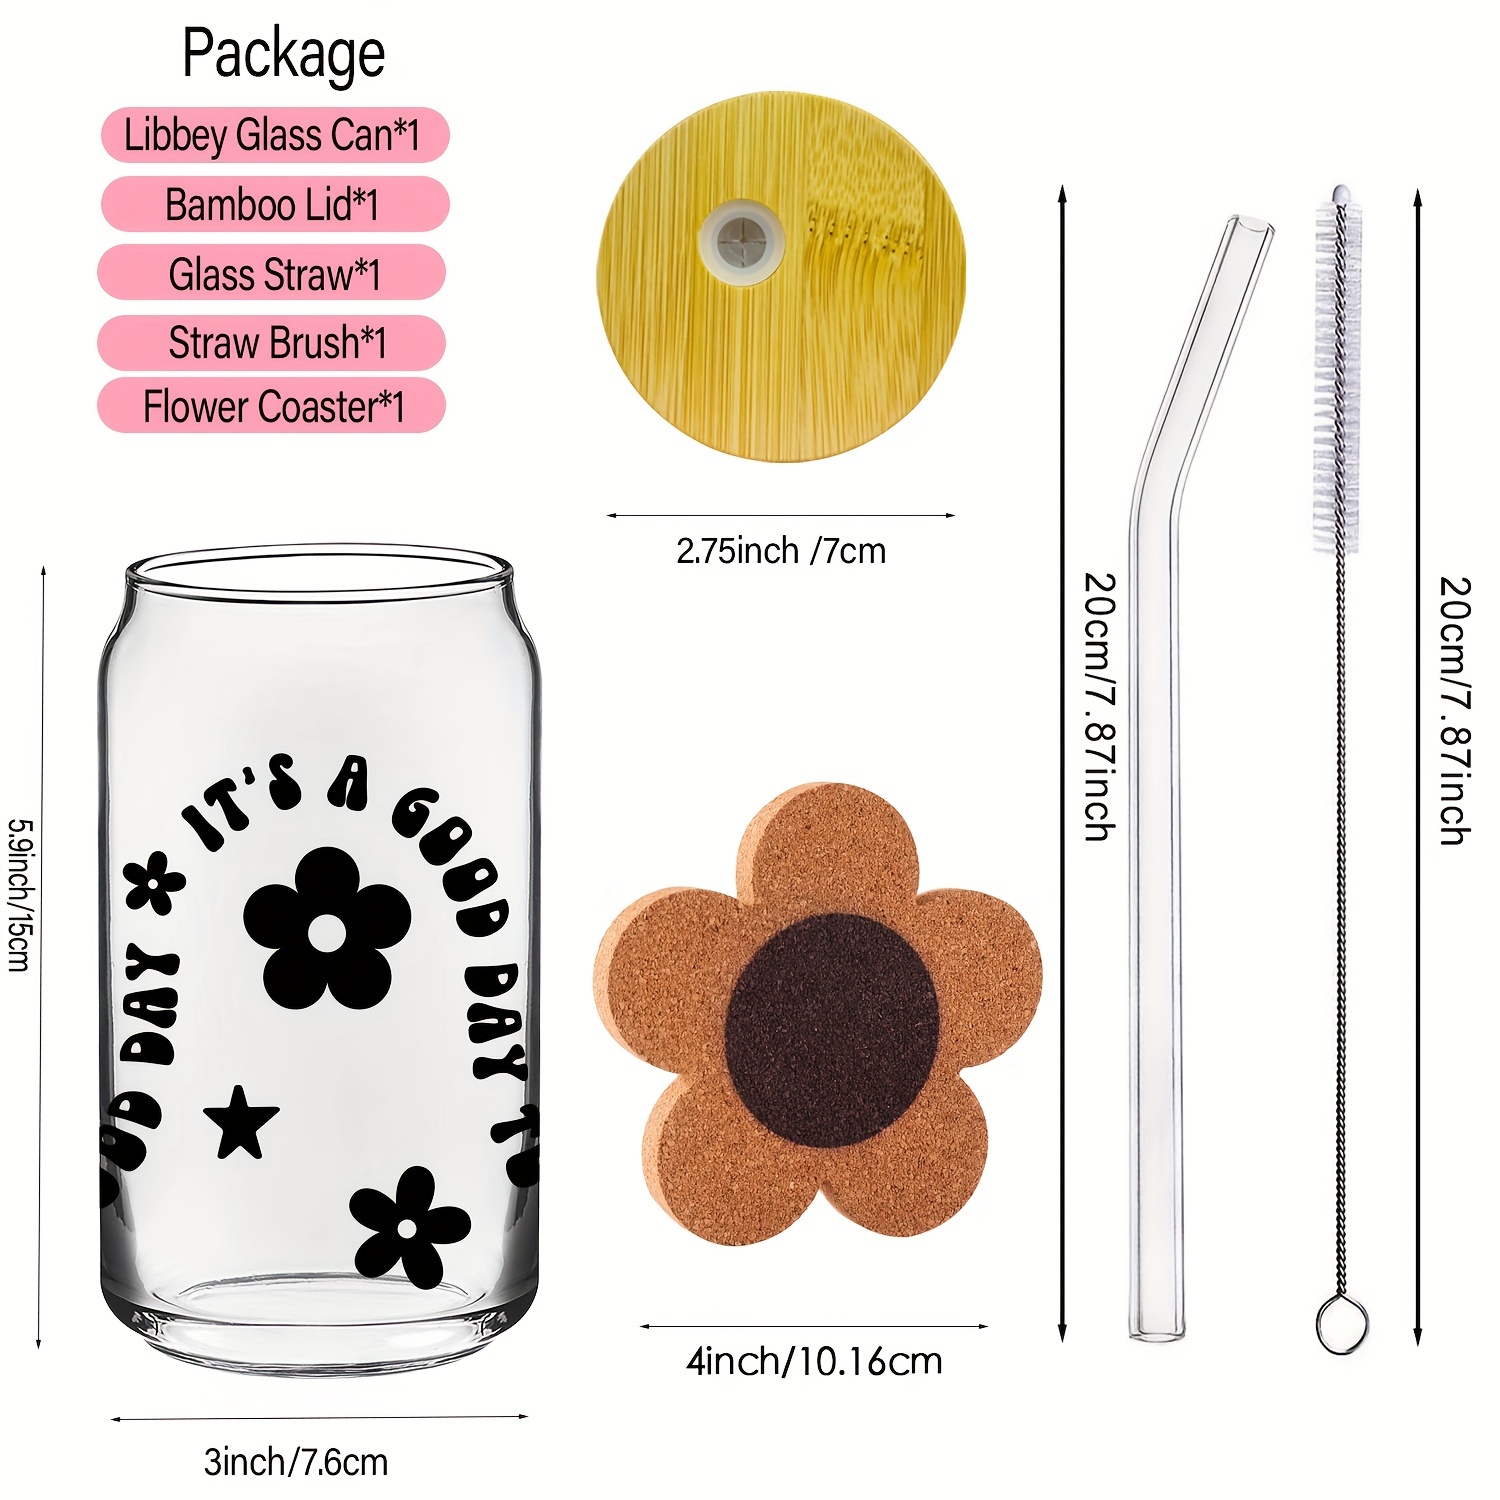 16oz pink Smile Flower Themed Libbey Glass Cans Set (1pc Glass Cup+1pc  Bamboo Lid+1pc Glass Straw +1pc Straw Brush), Beer Glass Cans, Soda, Iced  Coff